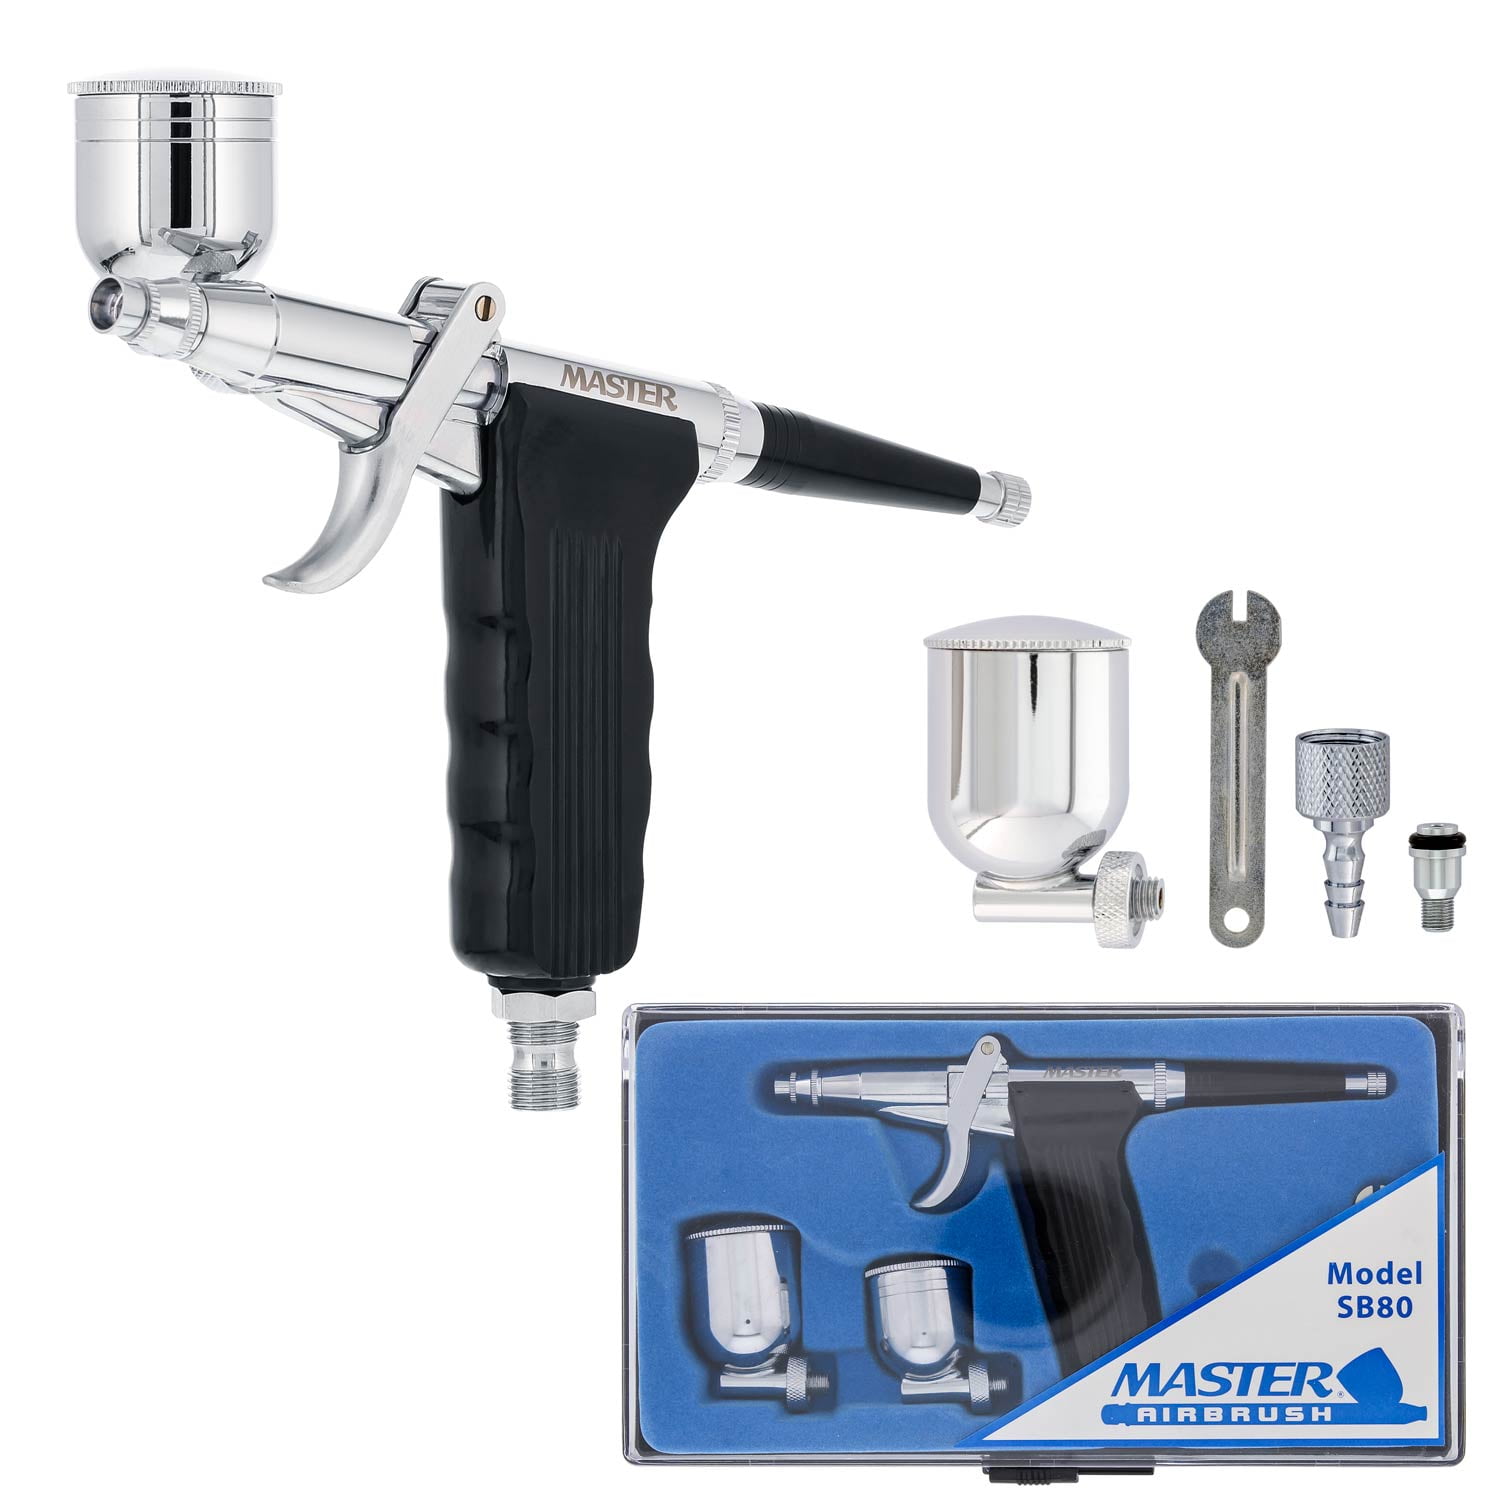 Pro Dual Action 3 Airbrush Kit Paint Spray Gun For Commercial or Personal Use 